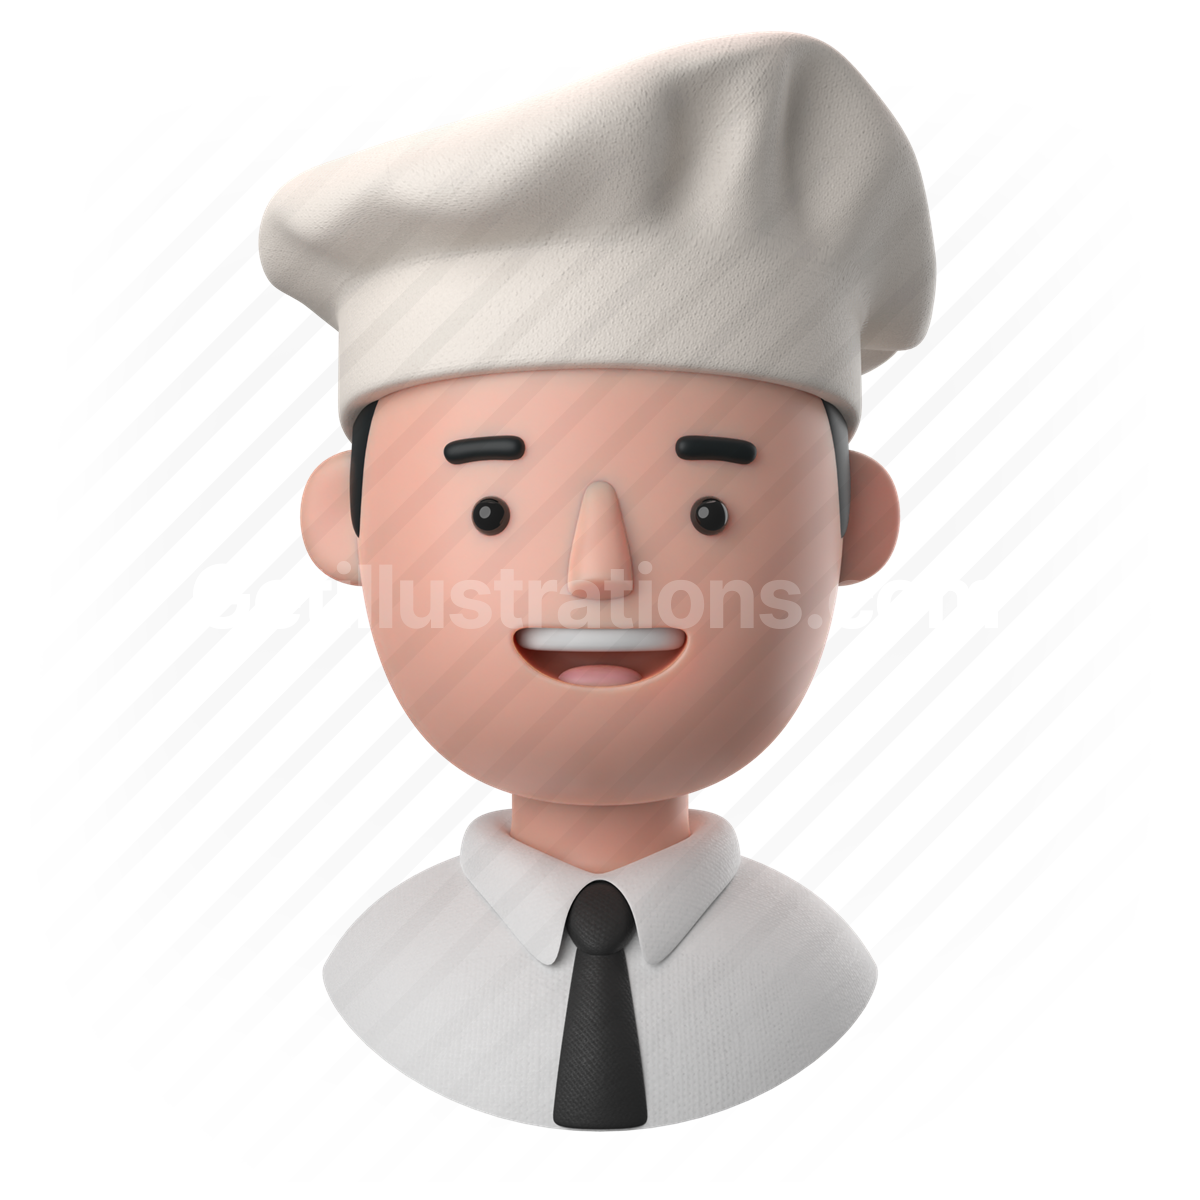 man, male, people, person, chef, hat, cook, occupation, tie, shirt